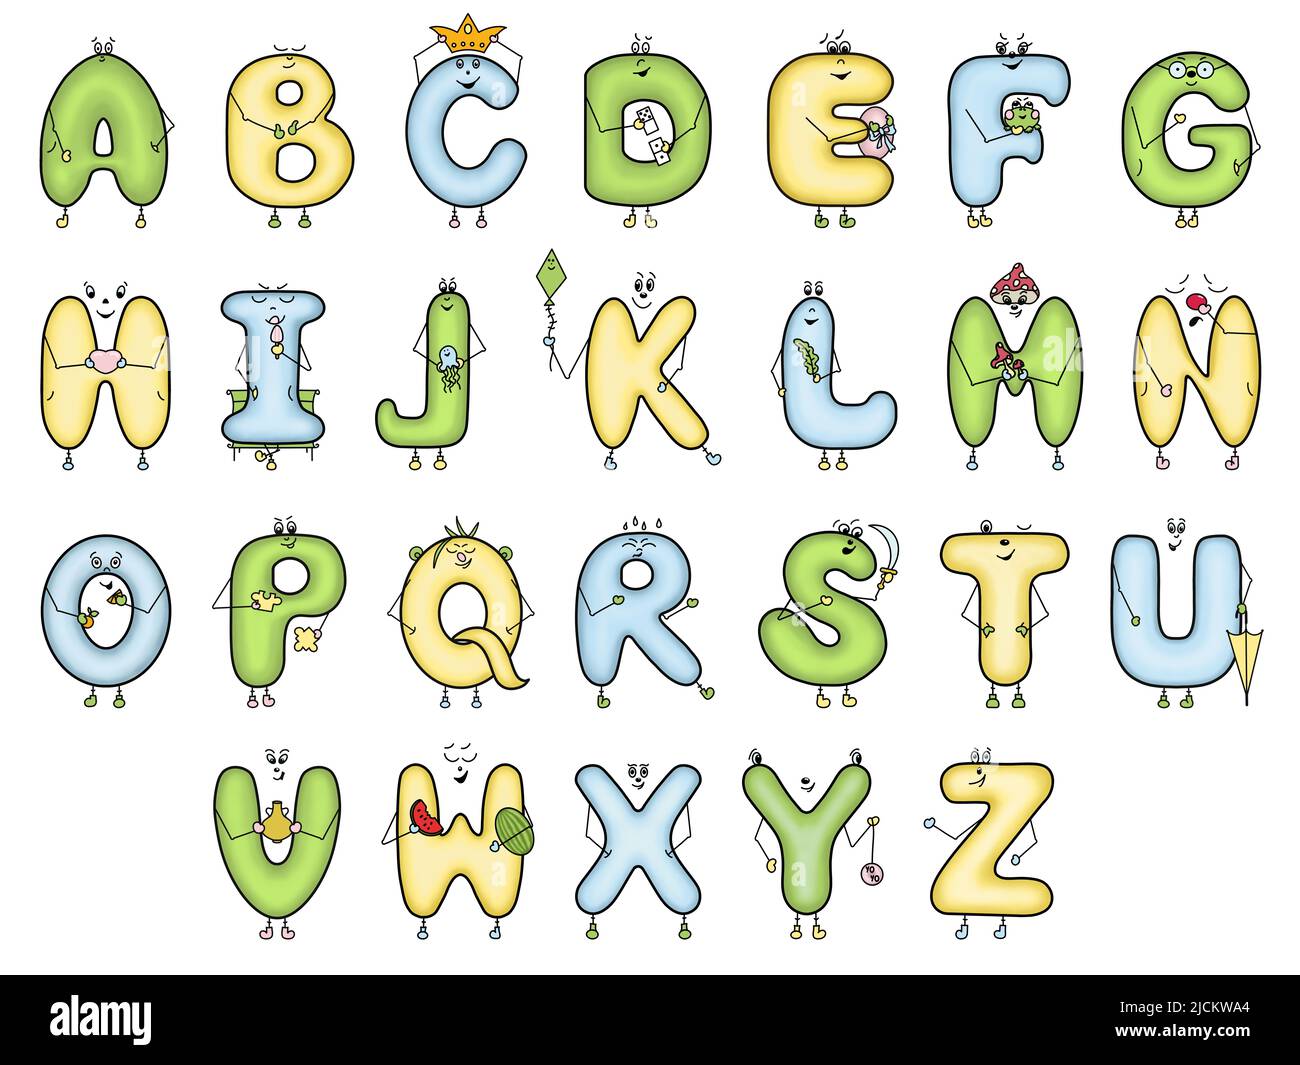 Cute Colorful English Alphabet for Preschoolers and School Children.  Alphabet In Cartoon Style. Funny Letters with Various Characters.  Kindergarten Stock Photo - Alamy